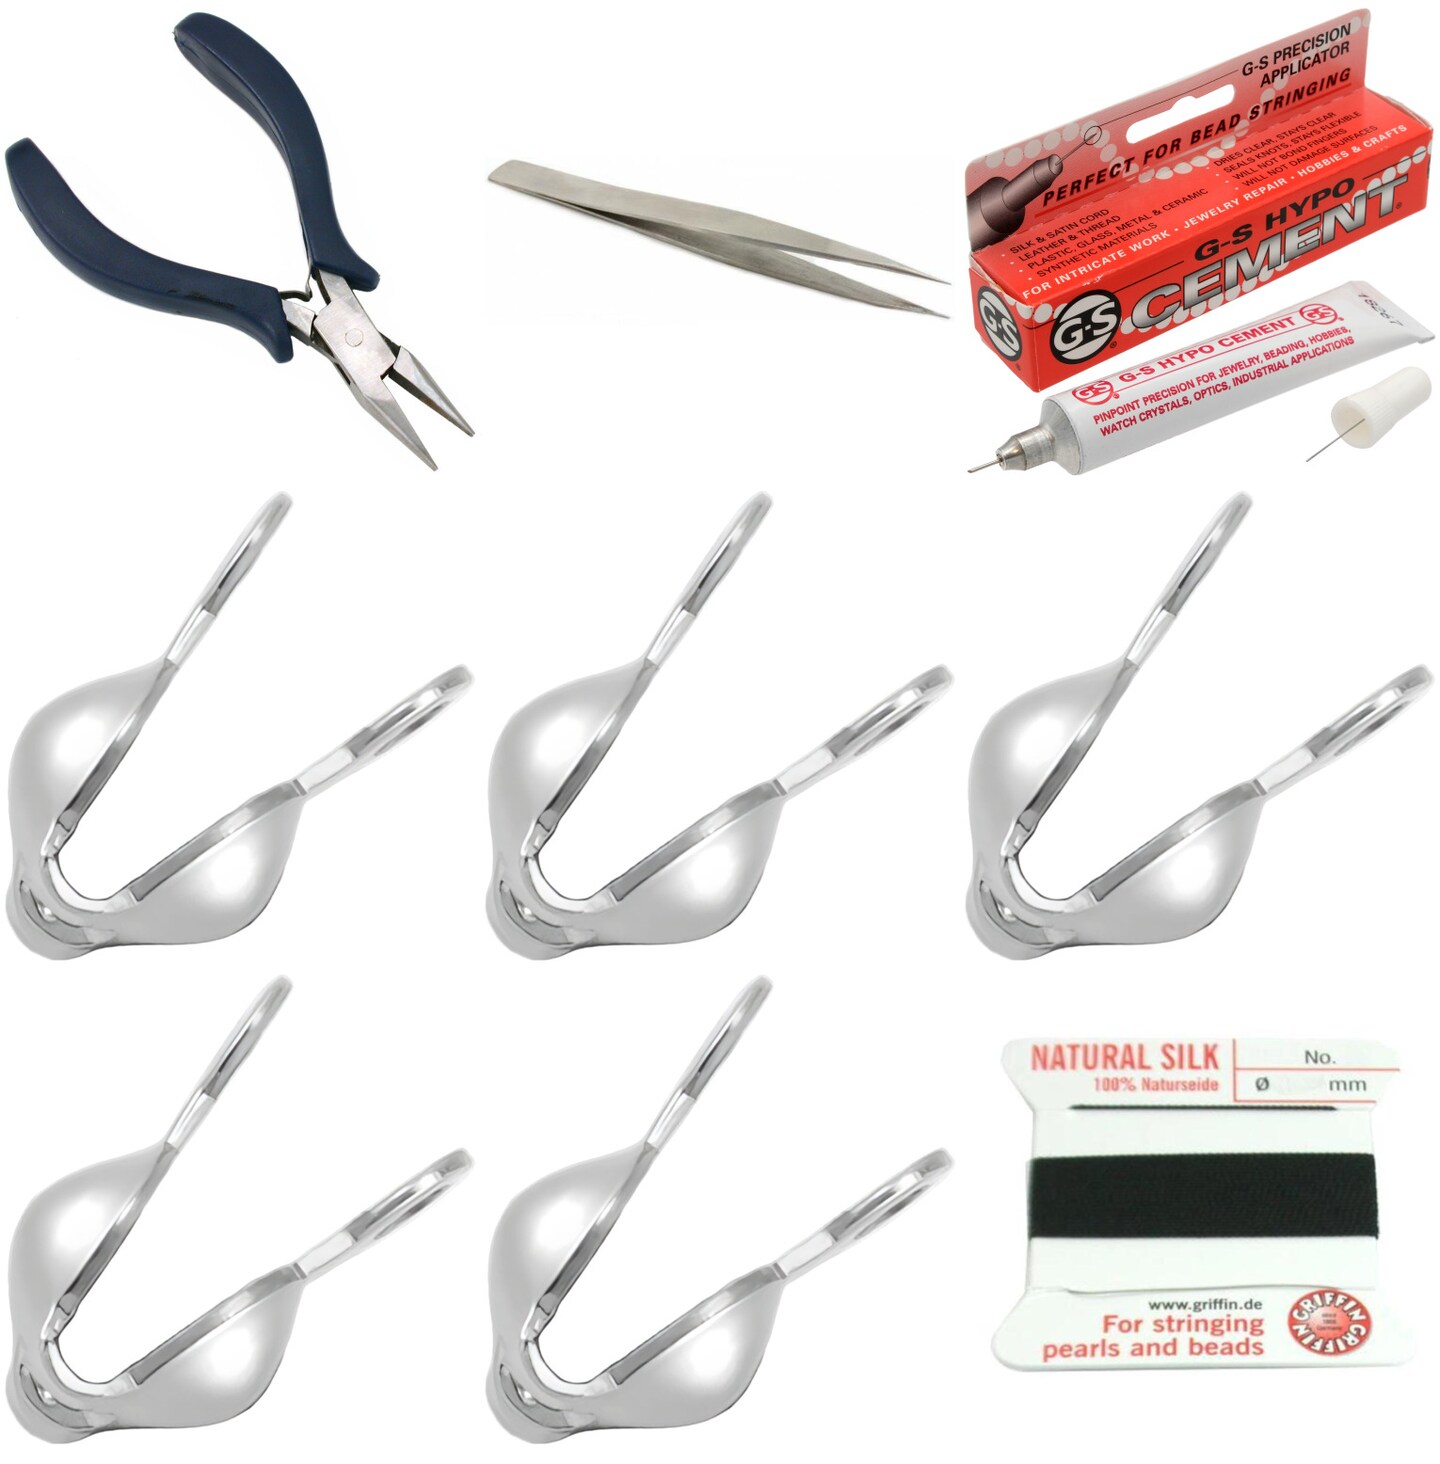 5 Metal Clippers Tool For Metal Model Kits